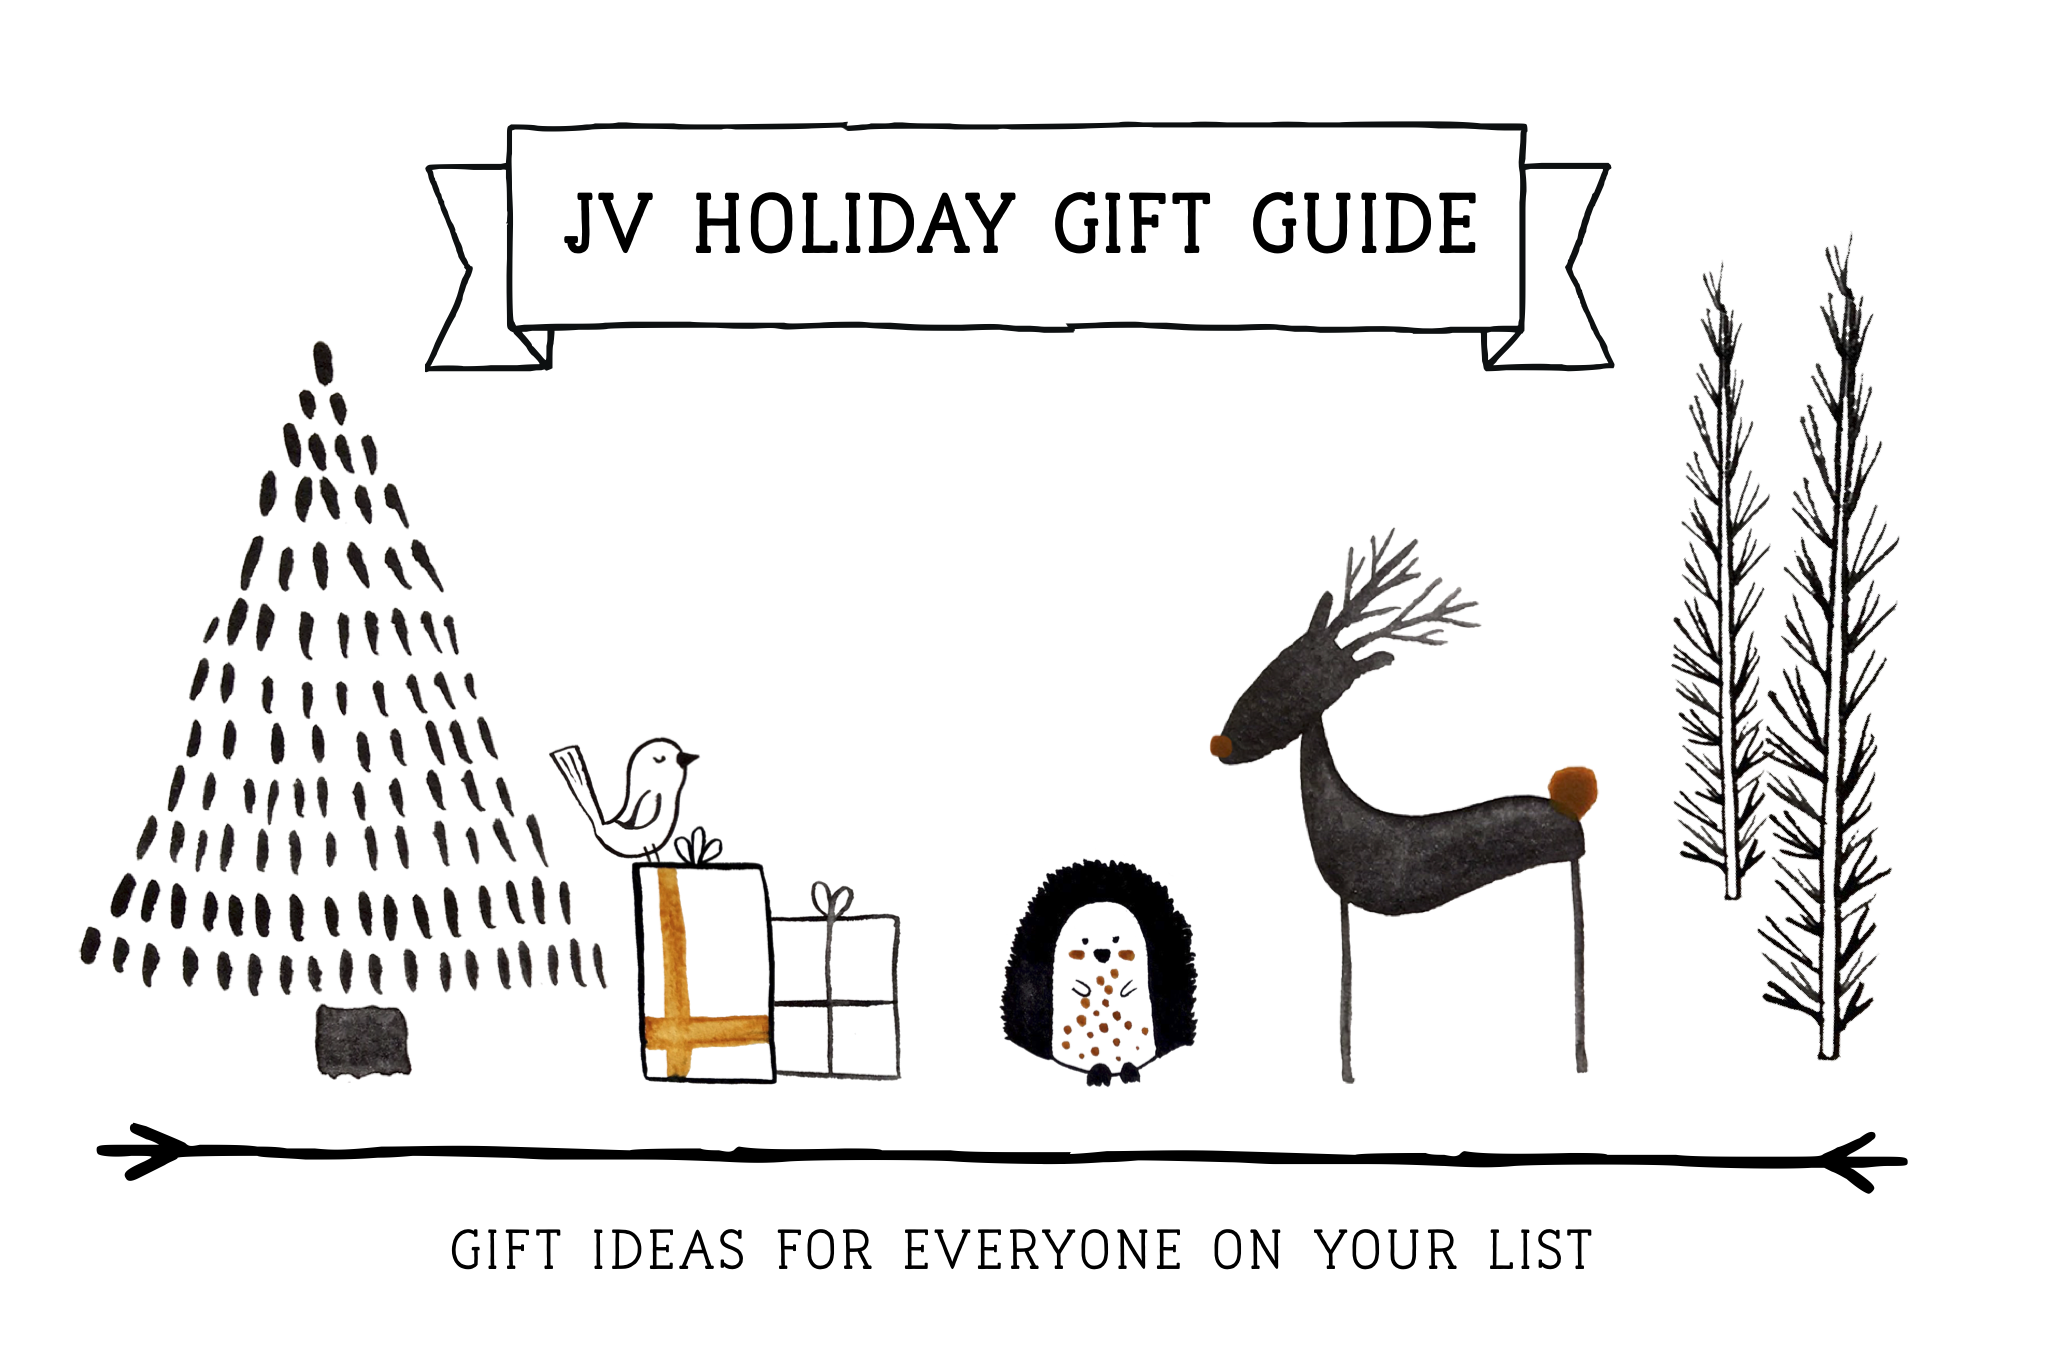 JV Holiday Gift Guide